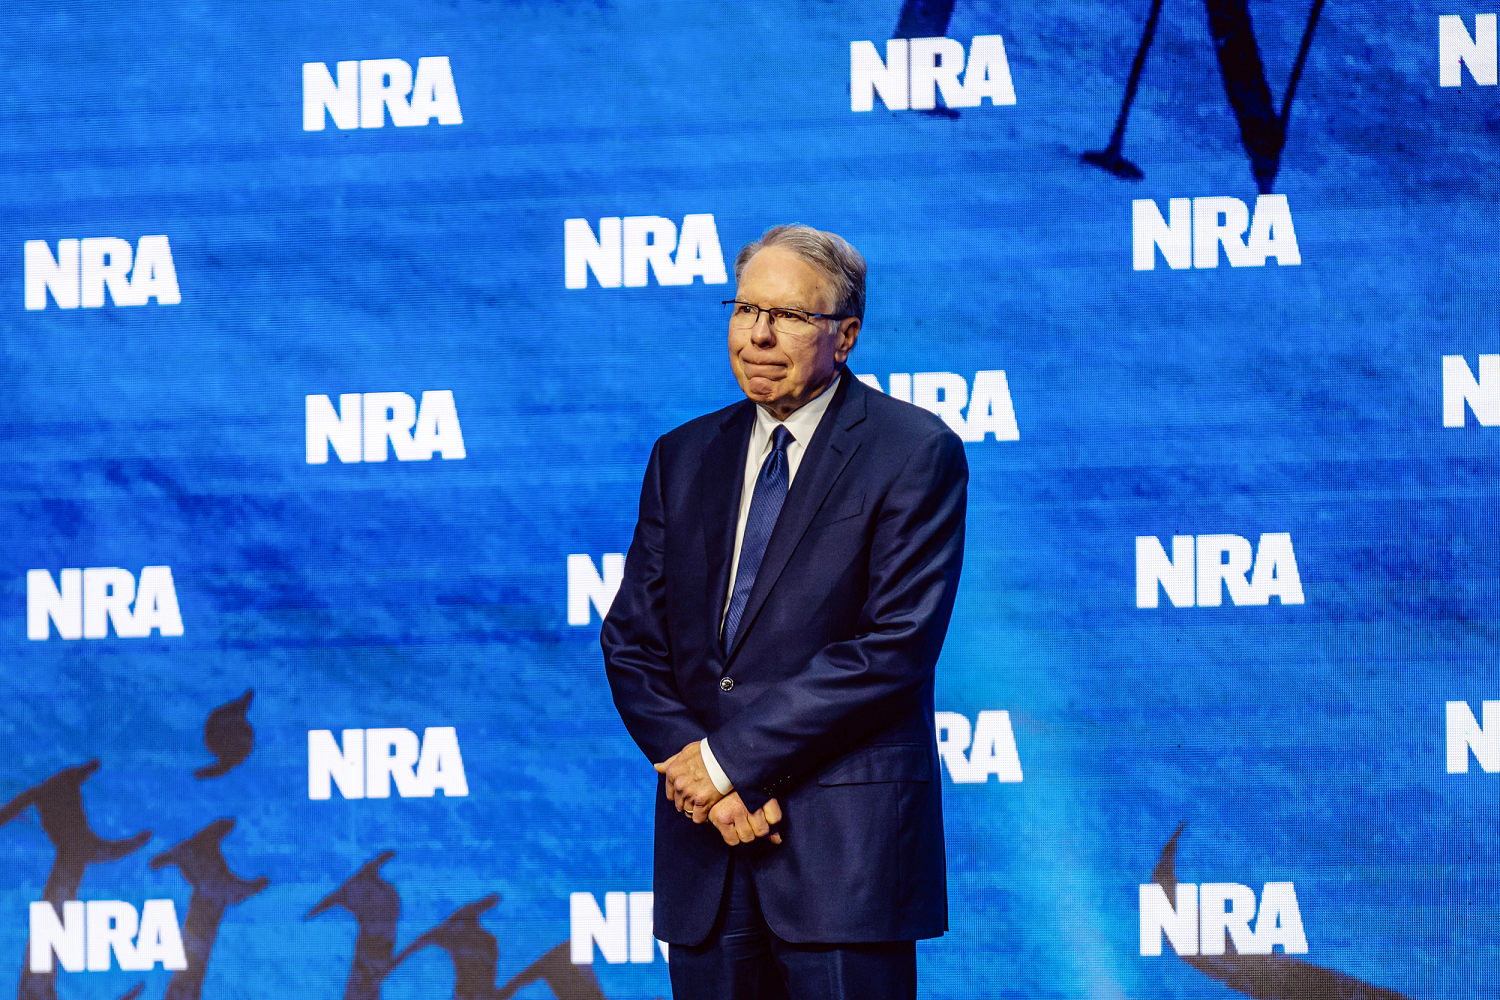 In civil corruption trial, jury finds NRA, Wayne LaPierre liable